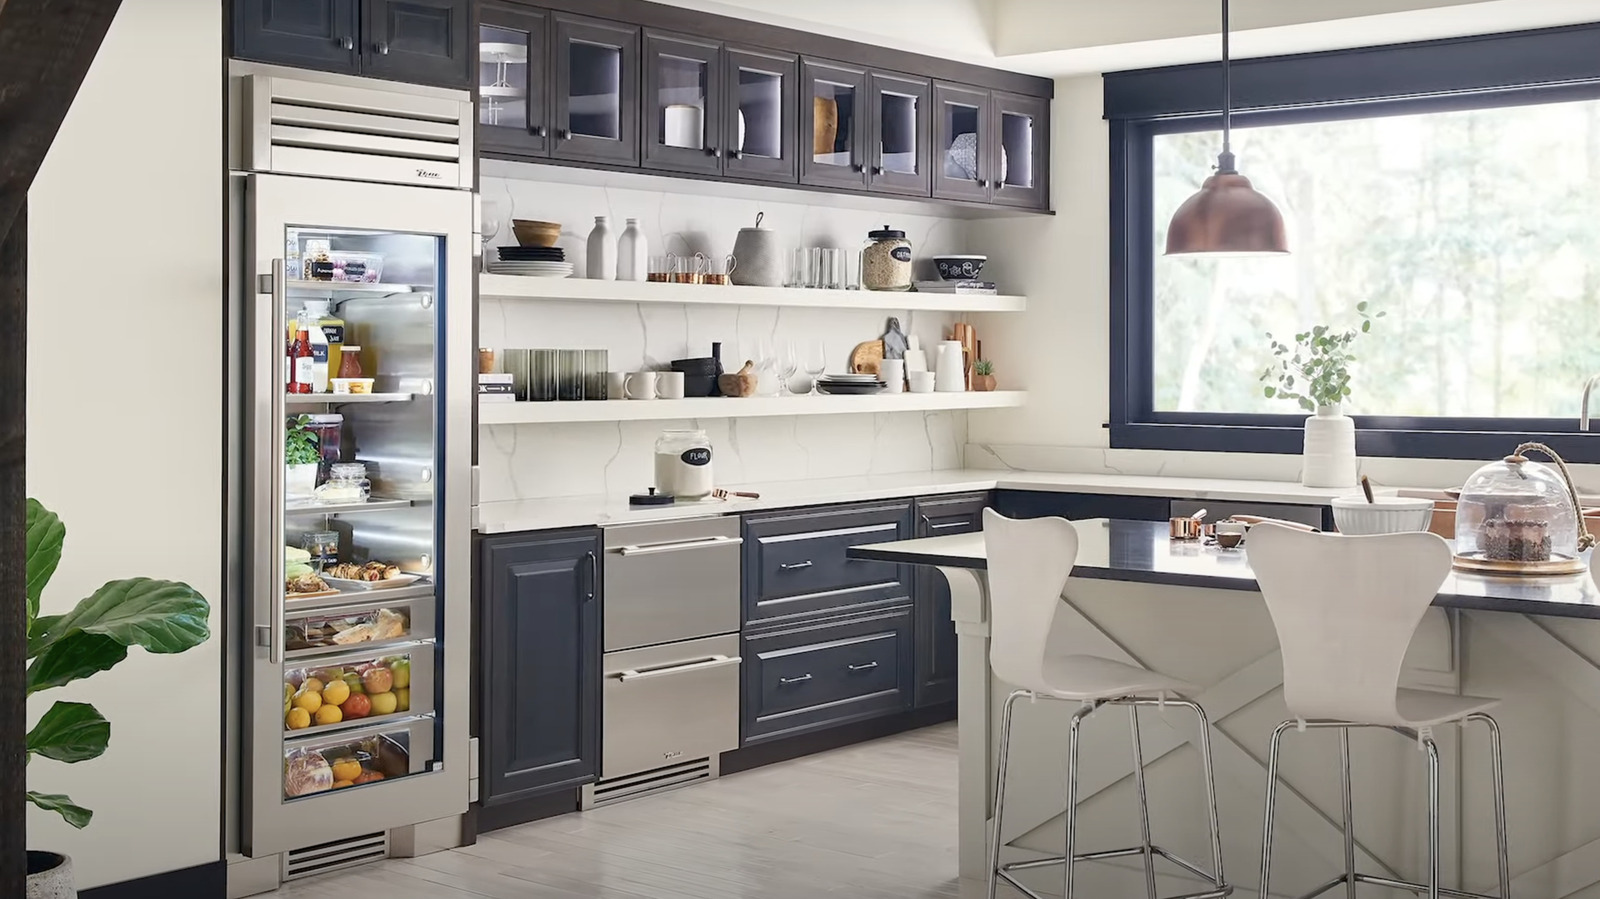 Undercounter Refrigerators – The New Must-Have In Modern Kitchens